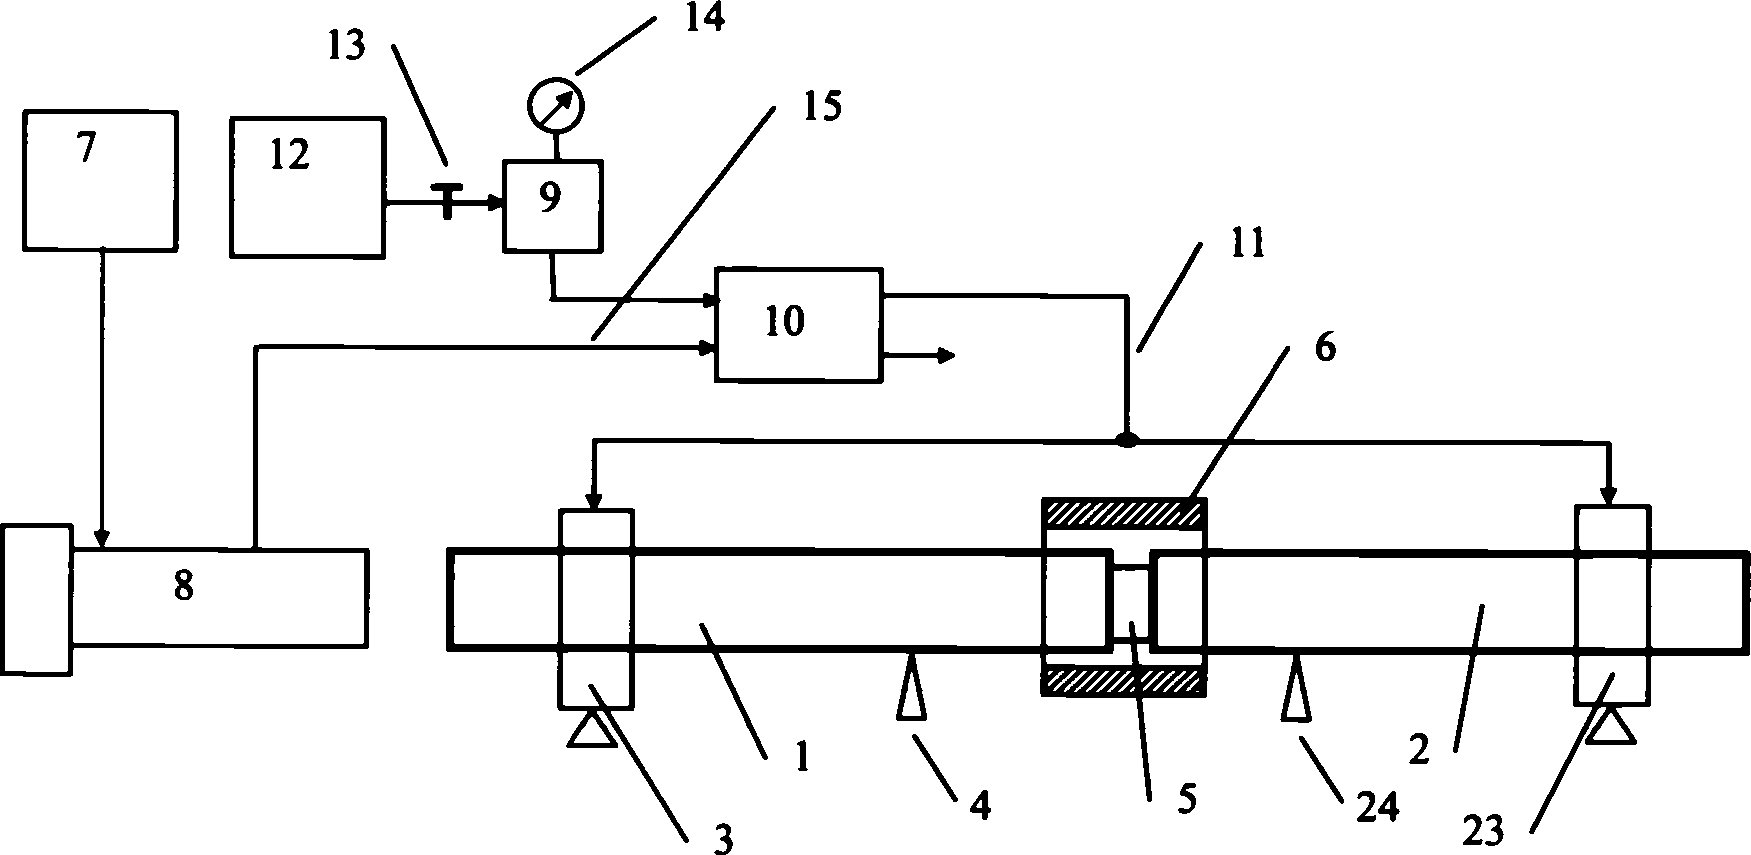 Double-air path bidirectional automatic assembling device for high-temperature Hopkinson pressure bar experiment